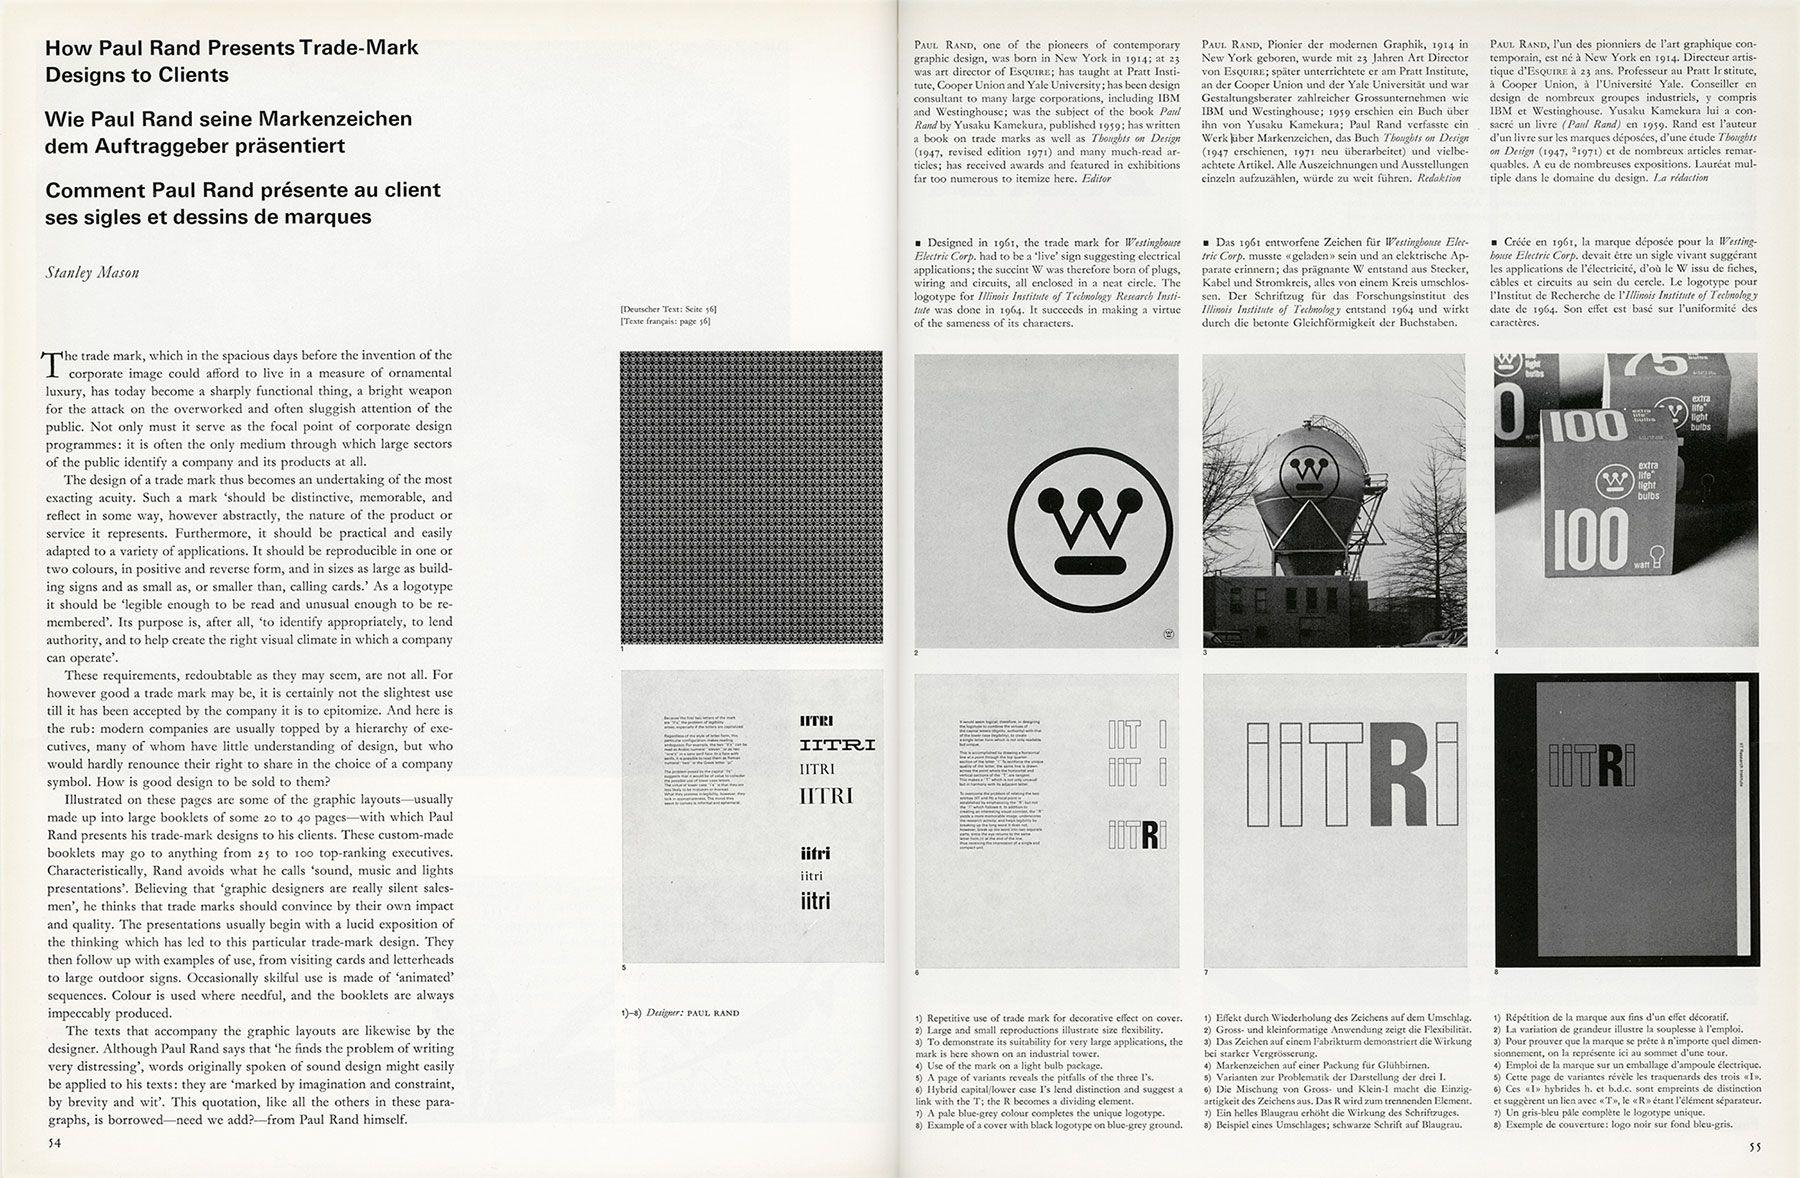 Client Logo - How Paul Rand presented logos to clients | Logo Design Love